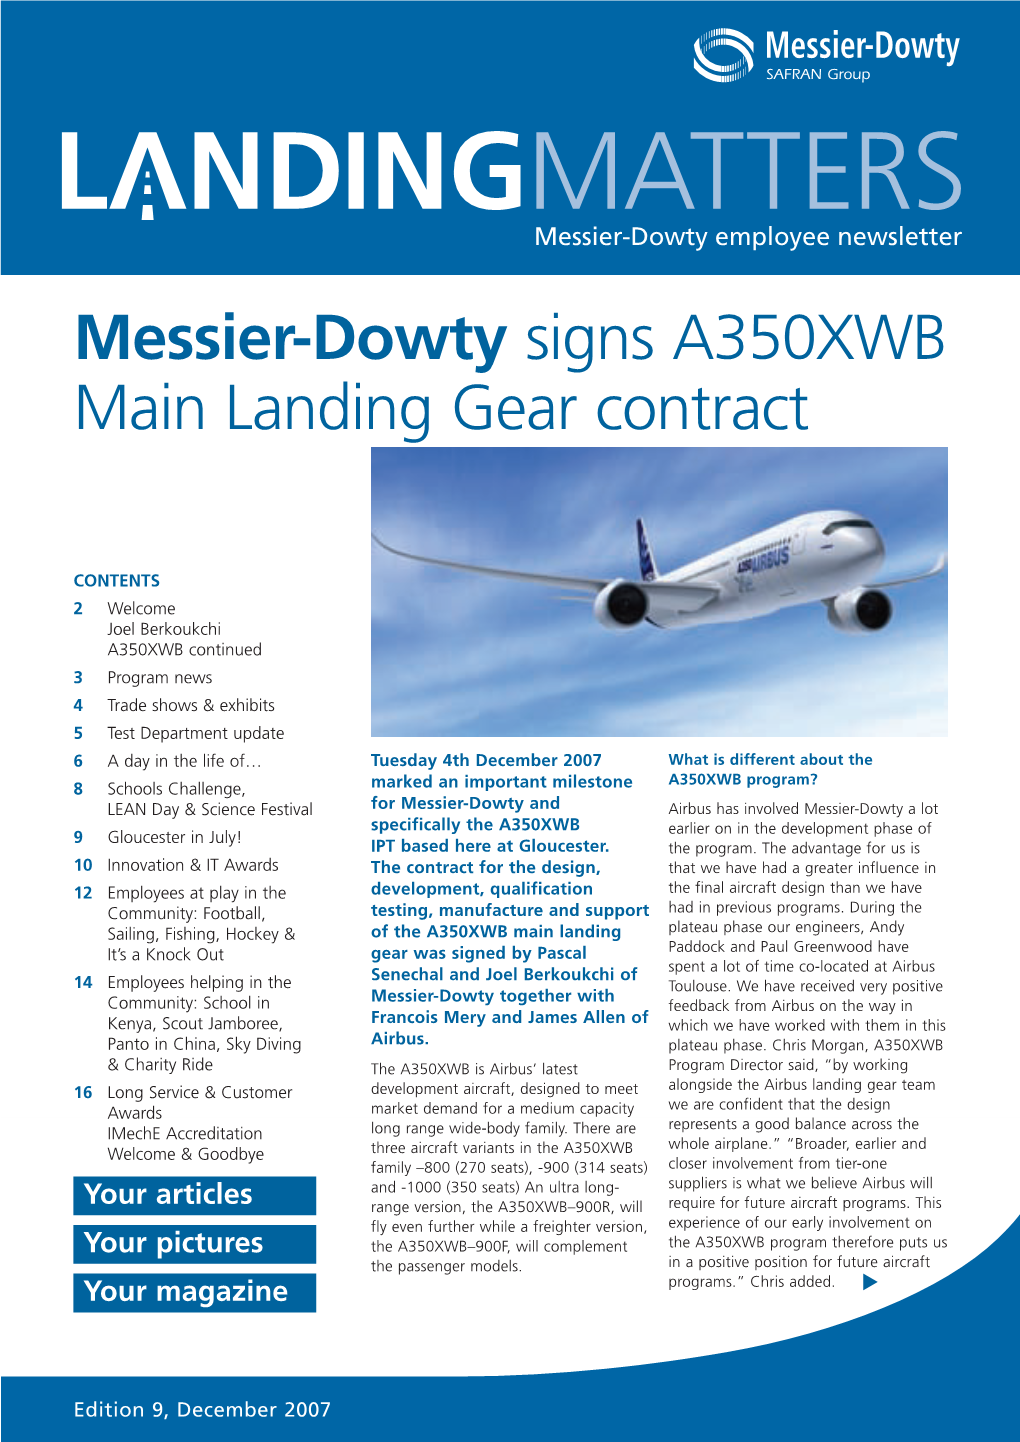 Messier-Dowty Signs A350XWB Main Landing Gear Contract